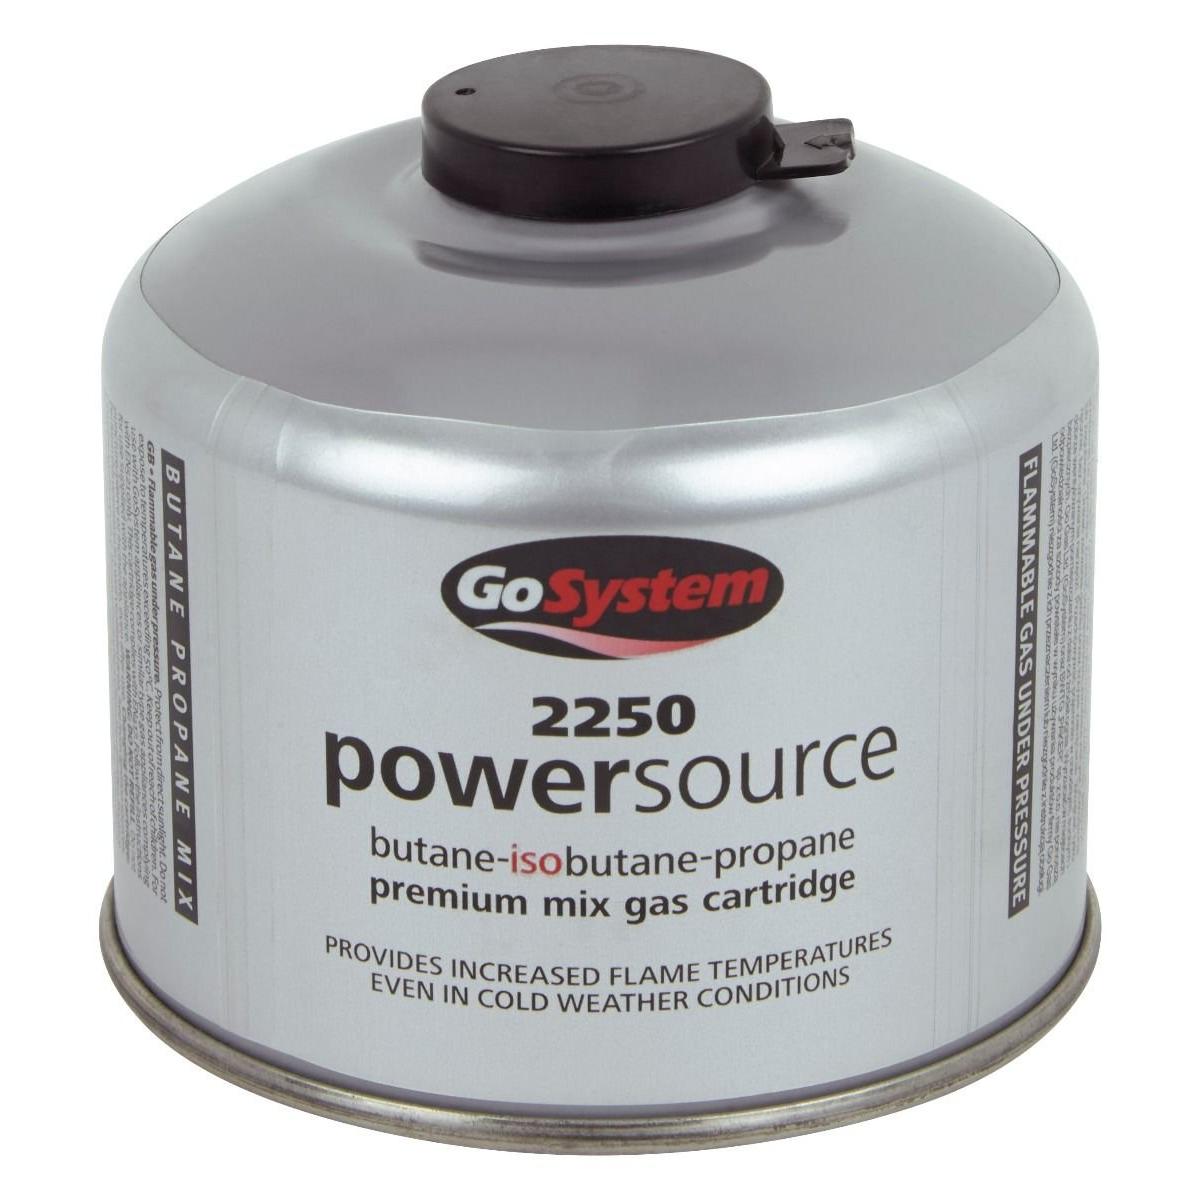 Go System Powersource Gas Cartridge 220g